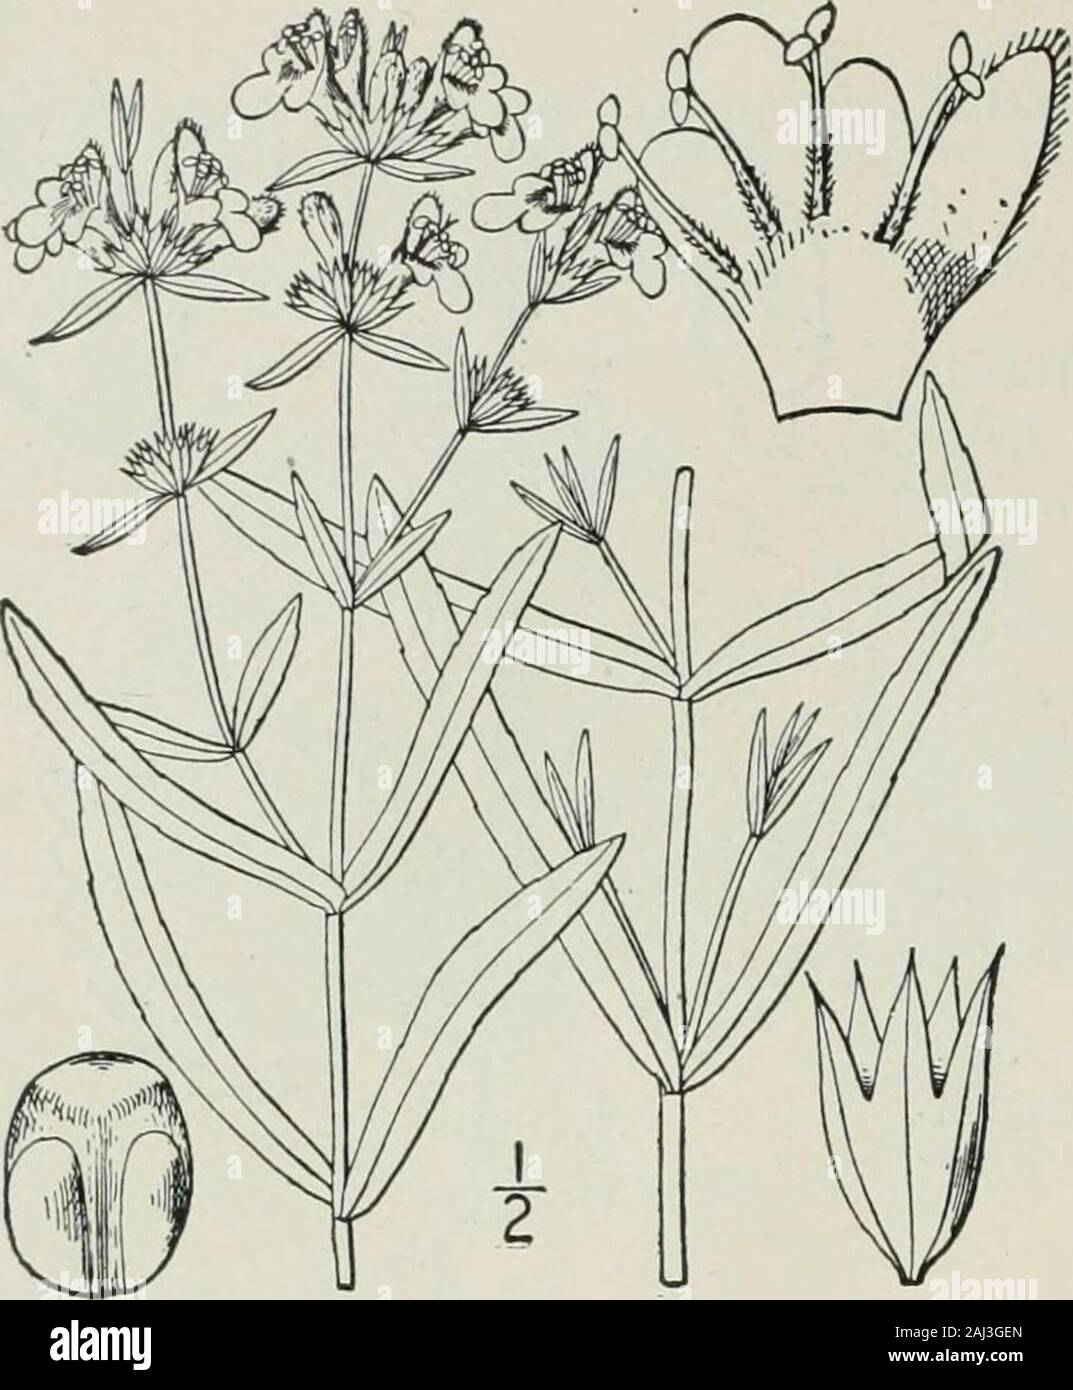 An illustrated flora of the northern United States, Canada and the British possessions : from Newfoundland to the parallel of the southern boundary of Virginia and from the Atlantic Ocean westward to the 102nd meridian . aves serrate. Stem hirsute only on the angles; leaves slightly pubescent. 3. S. aiiihigua. Stem densely hirsute all over; leaves densely pubescent. 4. S. arenicola. Leaves rounded, cordate or truncate at the base, oblong, ovate or lanceolate.Leaves all subsessile or short-petioled. Glabrous or very nearly so, the stem-angles sparsely bristly. 5 Stem retrorsely hirsute; leaves Stock Photo